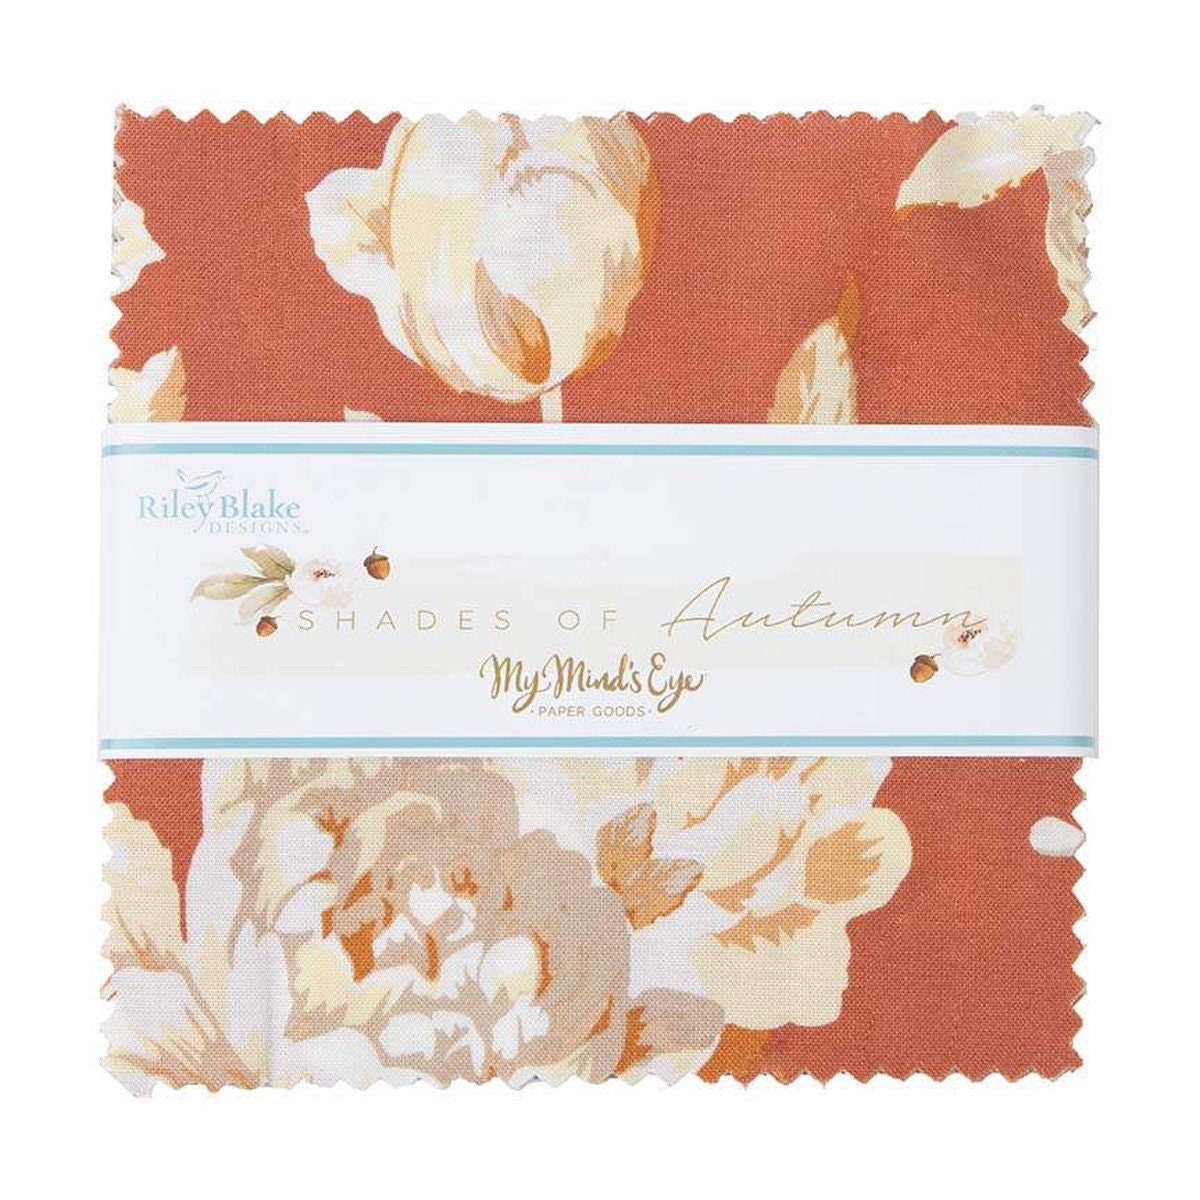 Shades of Autumn 5" Stacker Charm Pack - Riley Blake Designs 5-13470-42, 42 - Fall Themed Floral Charm Pack